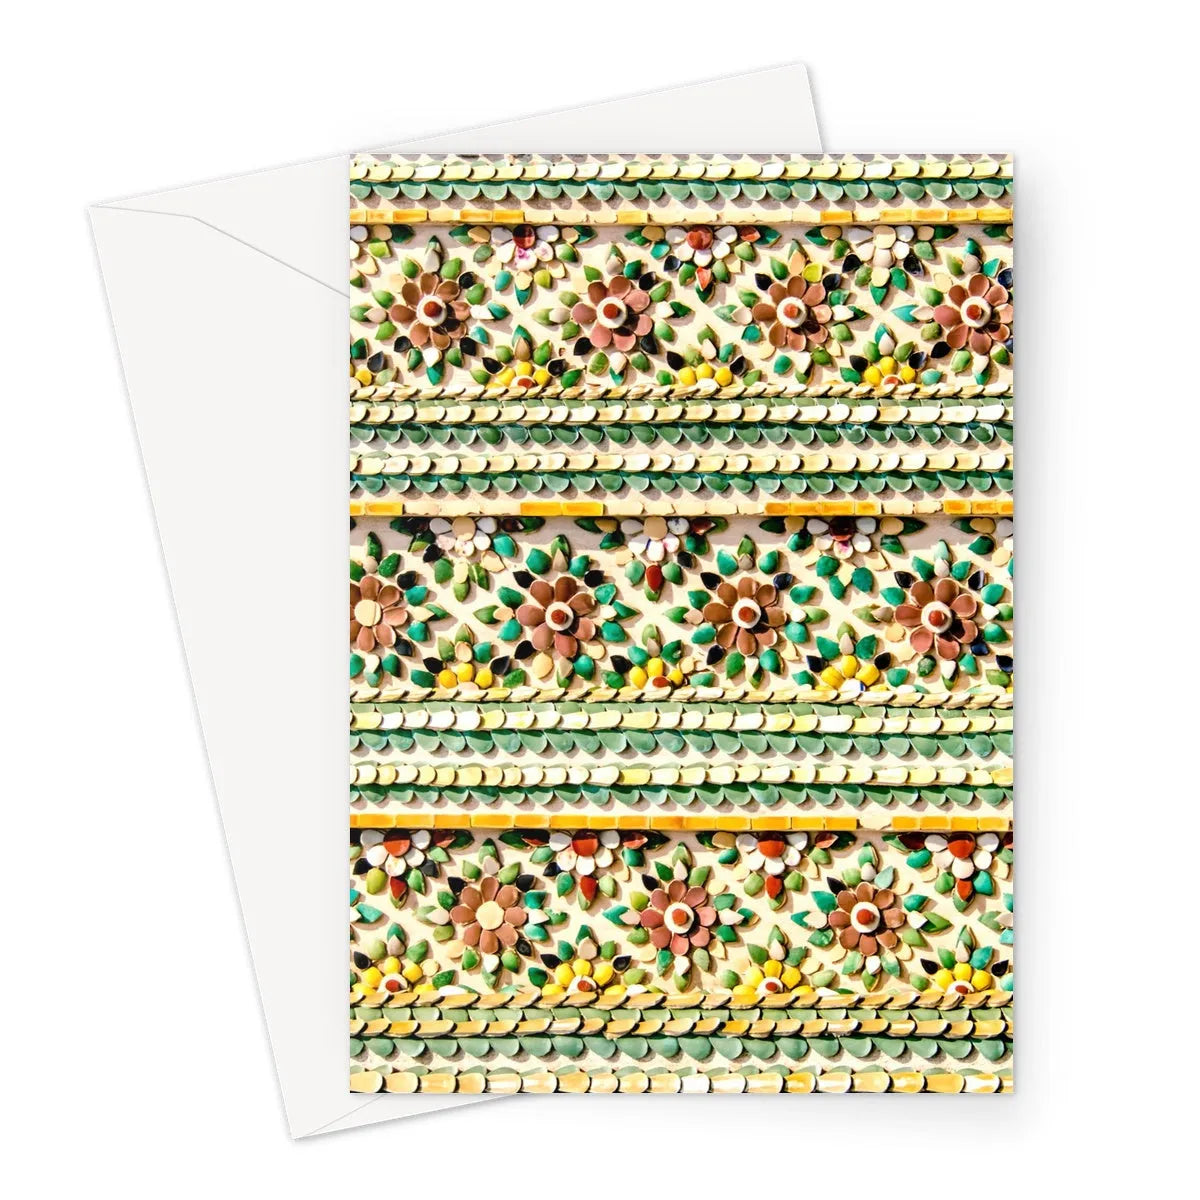 Flower Beds Greeting Card - A5 Portrait / 1 Card - Greeting & Note Cards - Aesthetic Art